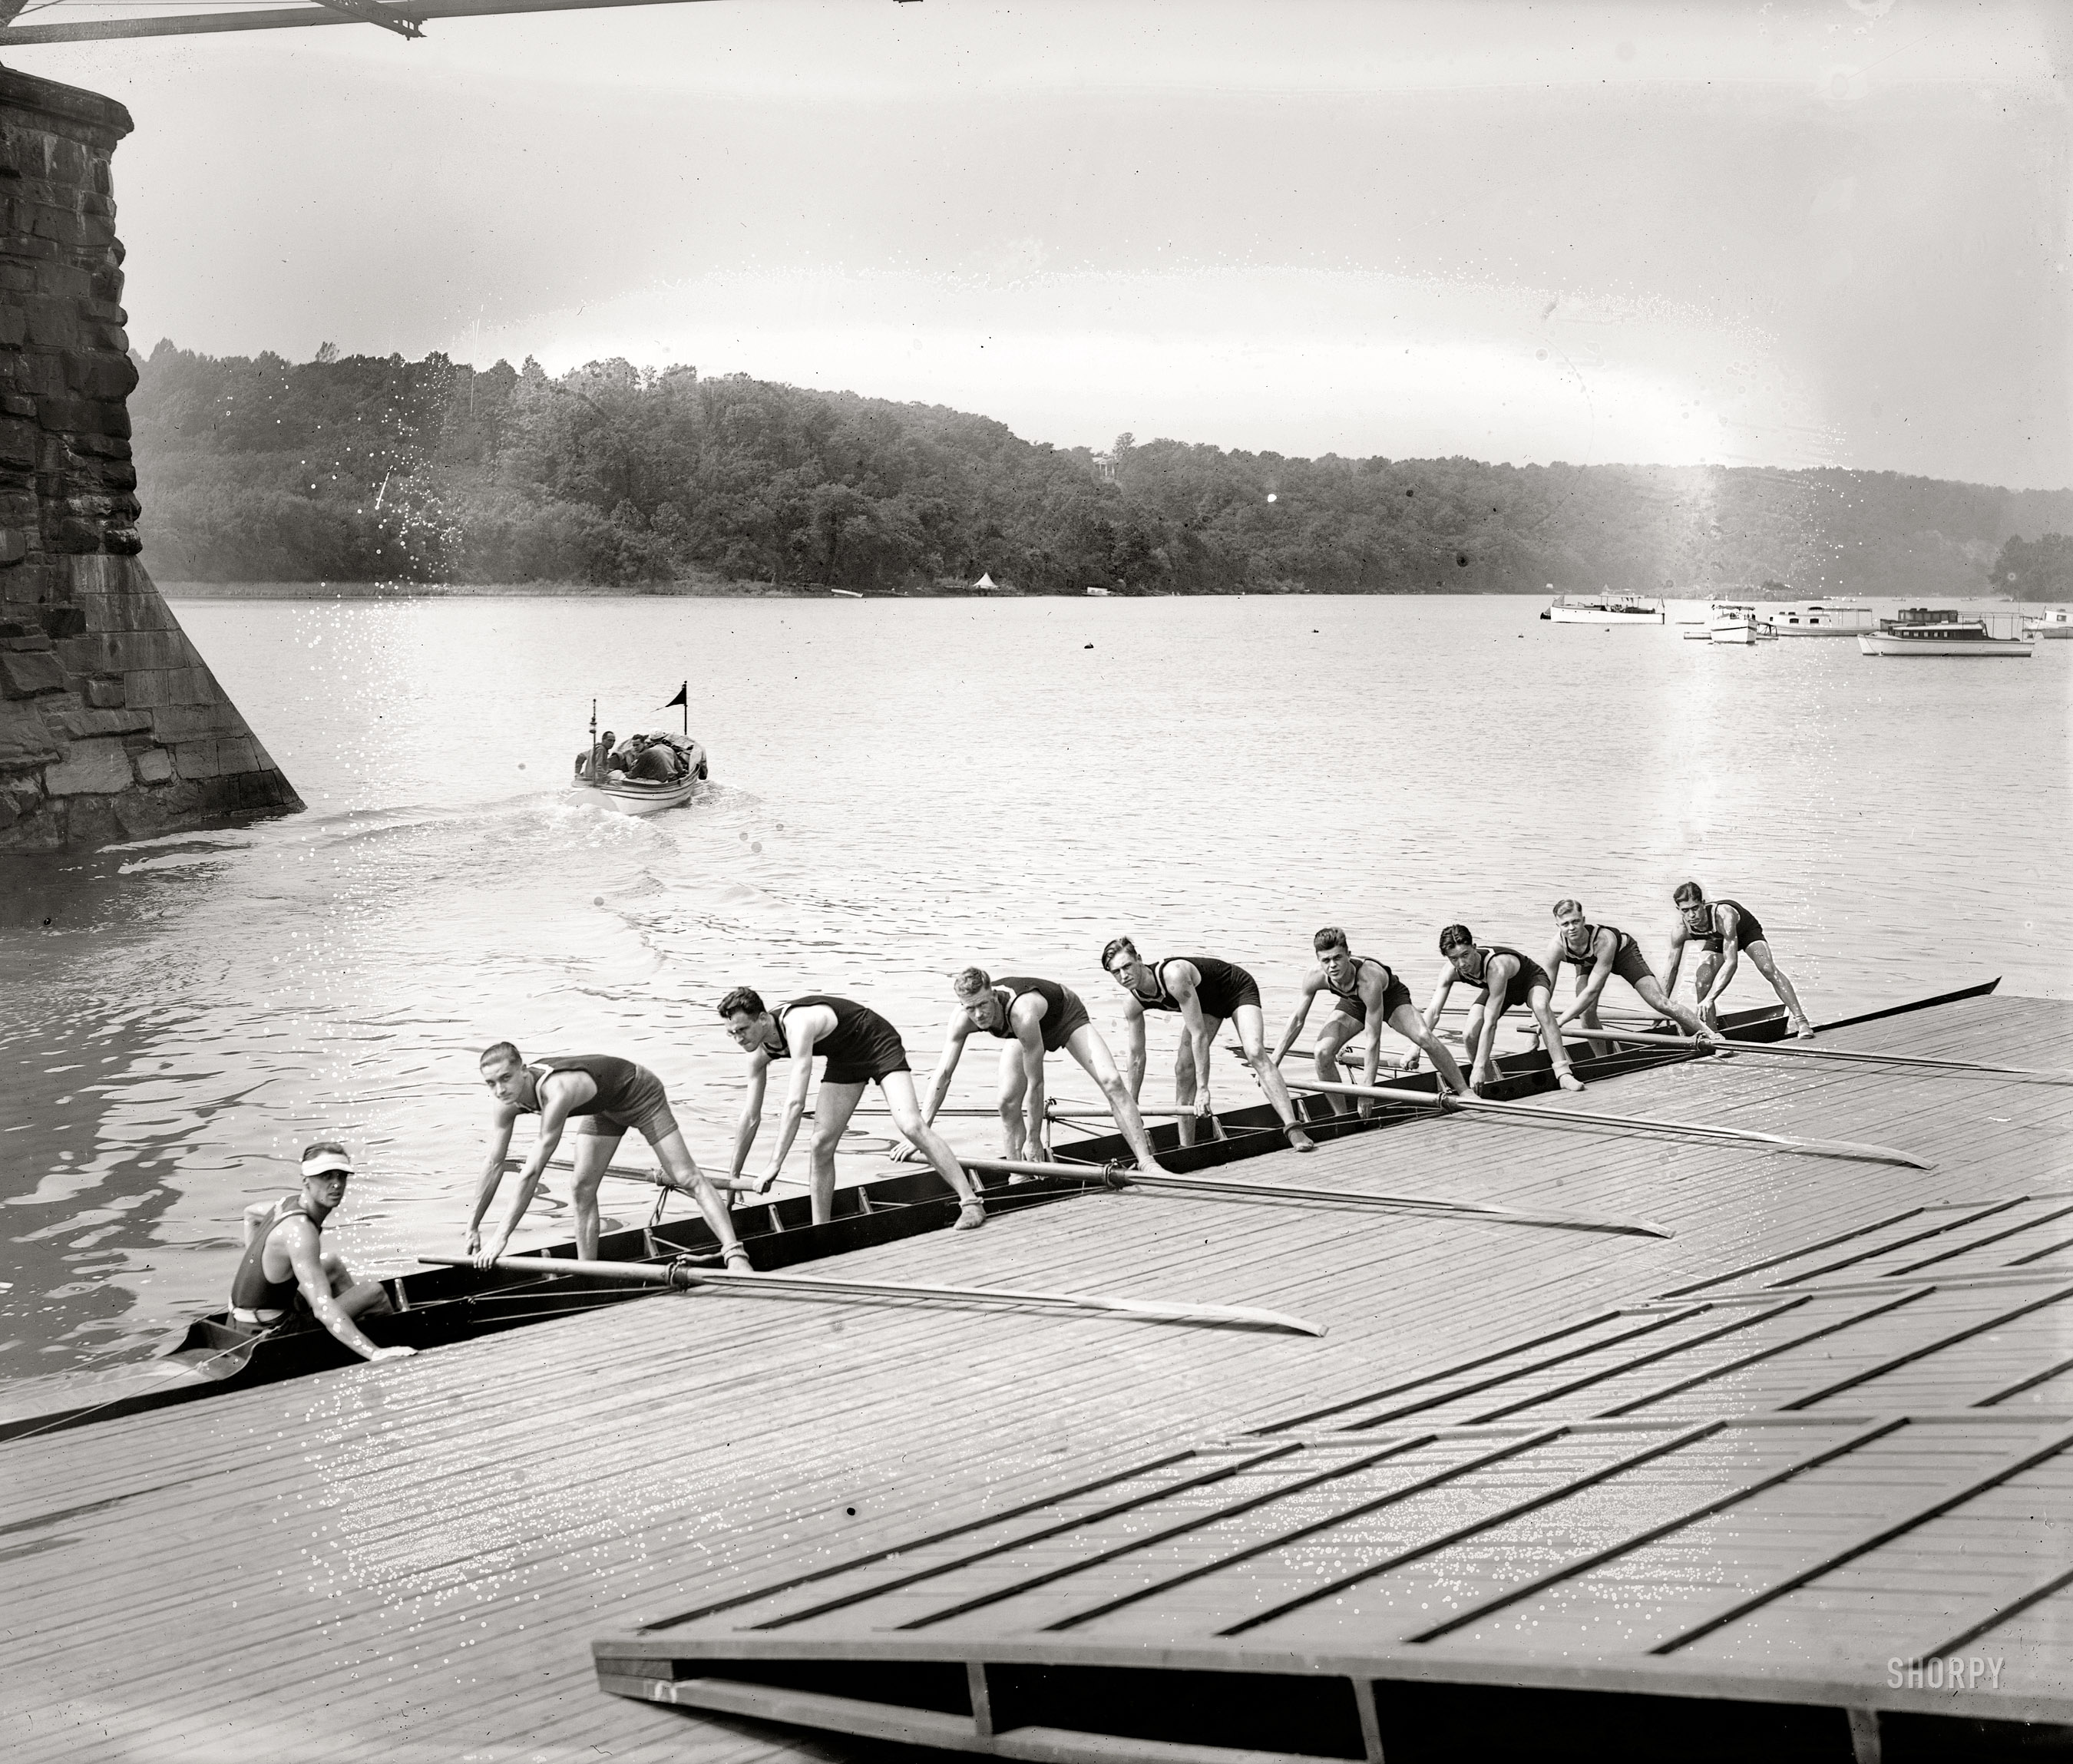 September 20, 1919. "Potomac Boat Club eight." On the river at the old Aqueduct Bridge. National Photo Company Collection glass negative. View full size.